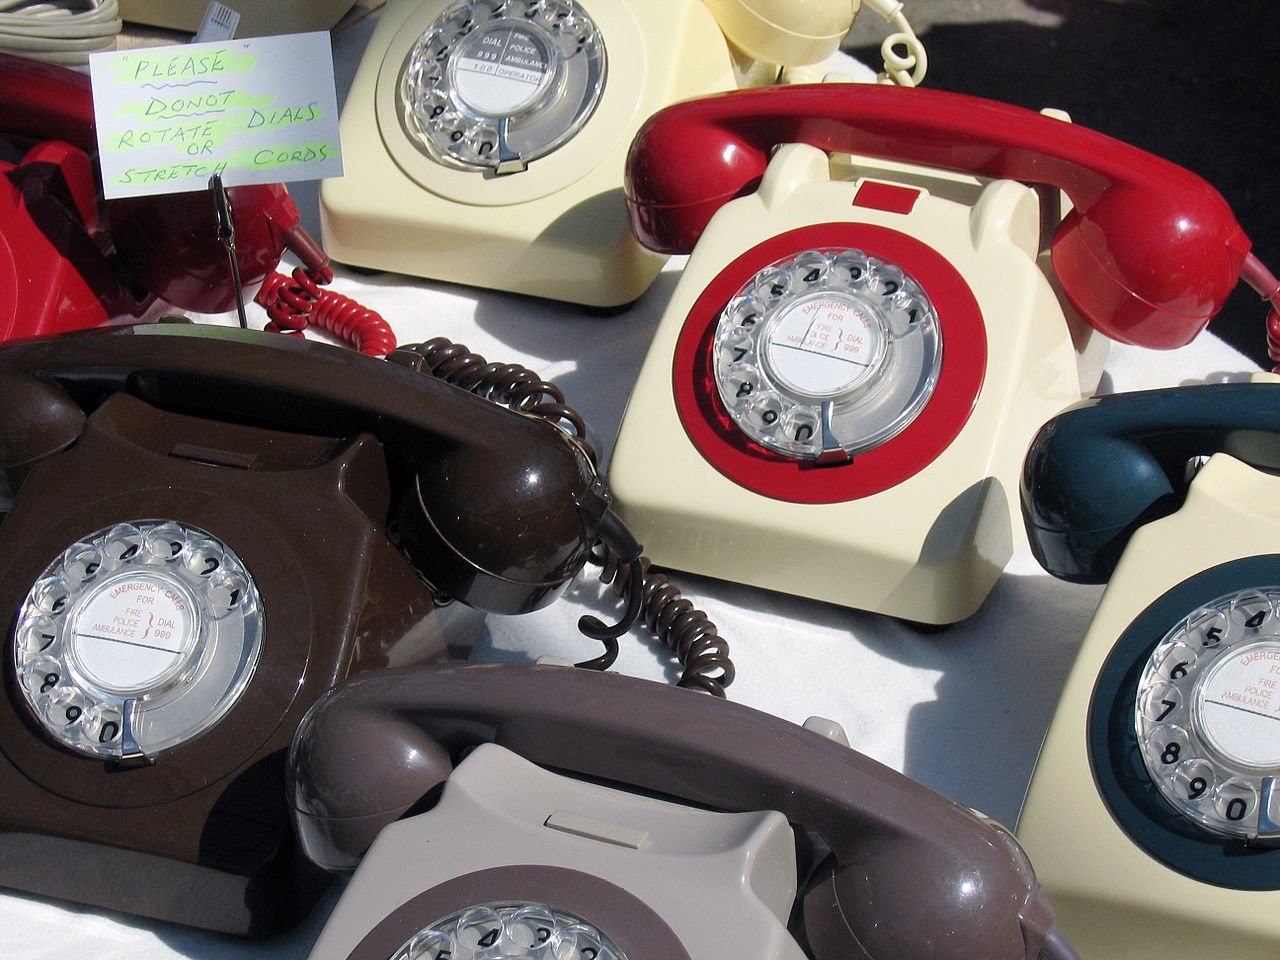 Dialing Back in Time: The Rotary Phone and Its Evolution